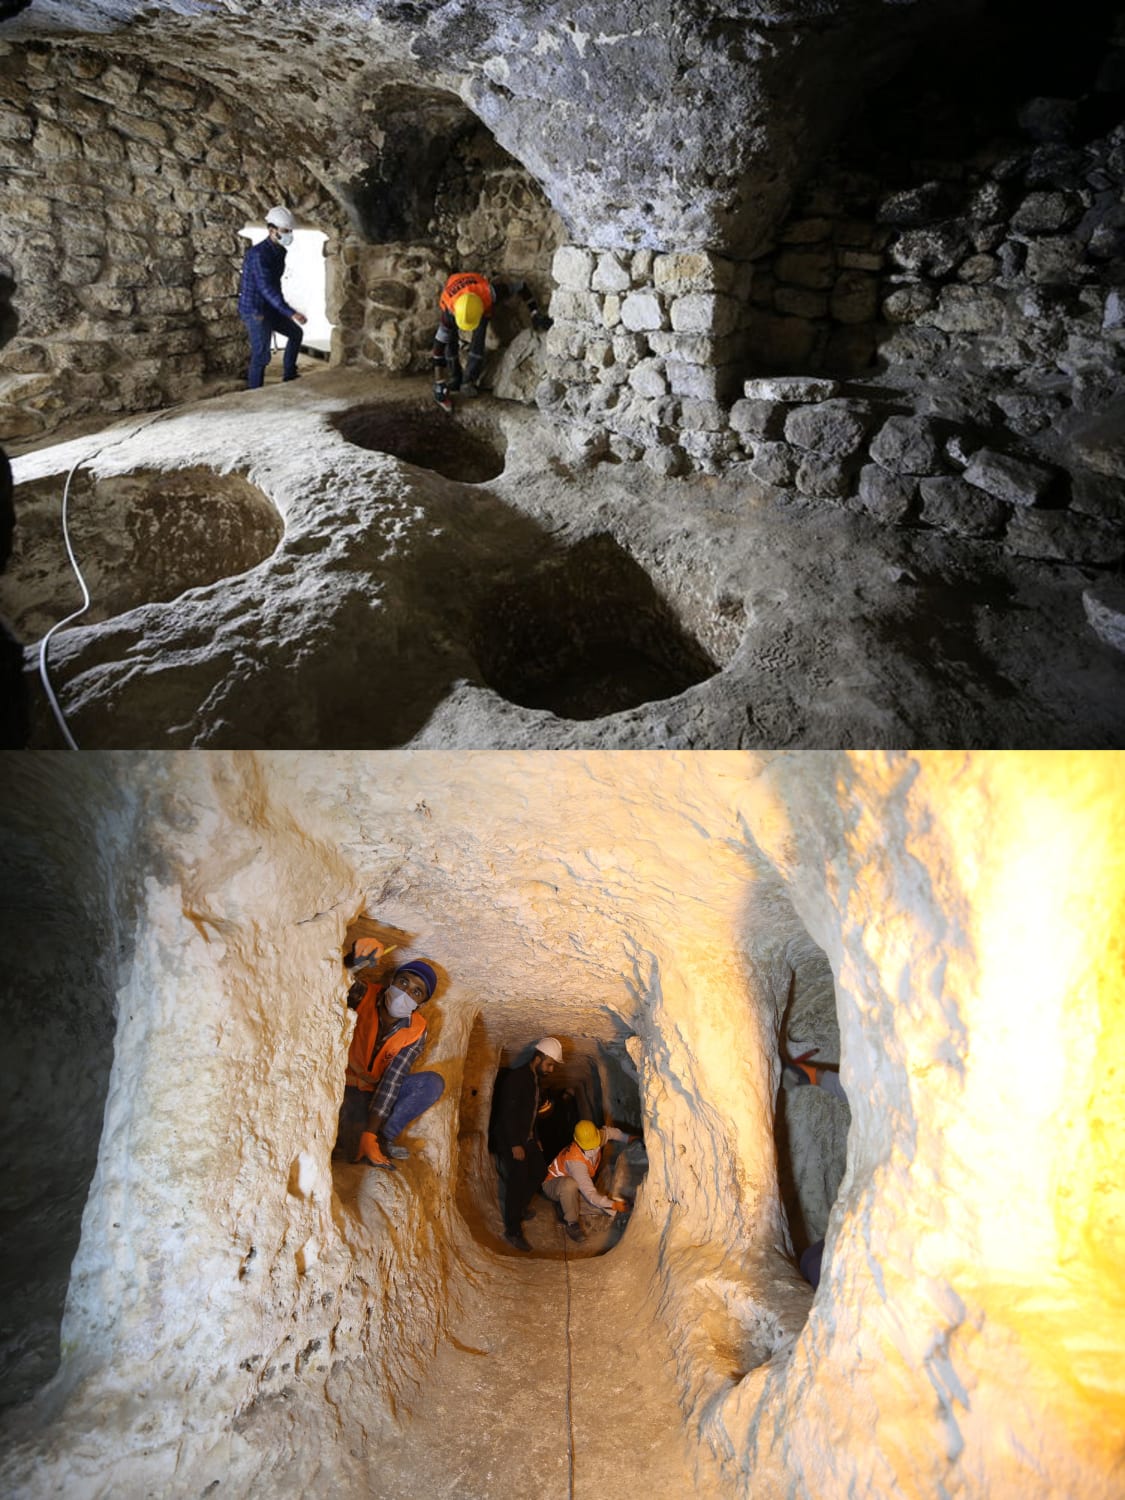 In 2020, workers discovered a huge underground city, in Midyat's old town in Turkey, after coming across a hidden access point during restoration work on a historic house. The complex may have been a refuge for 70,000 Jews and early Christians during Roman rule